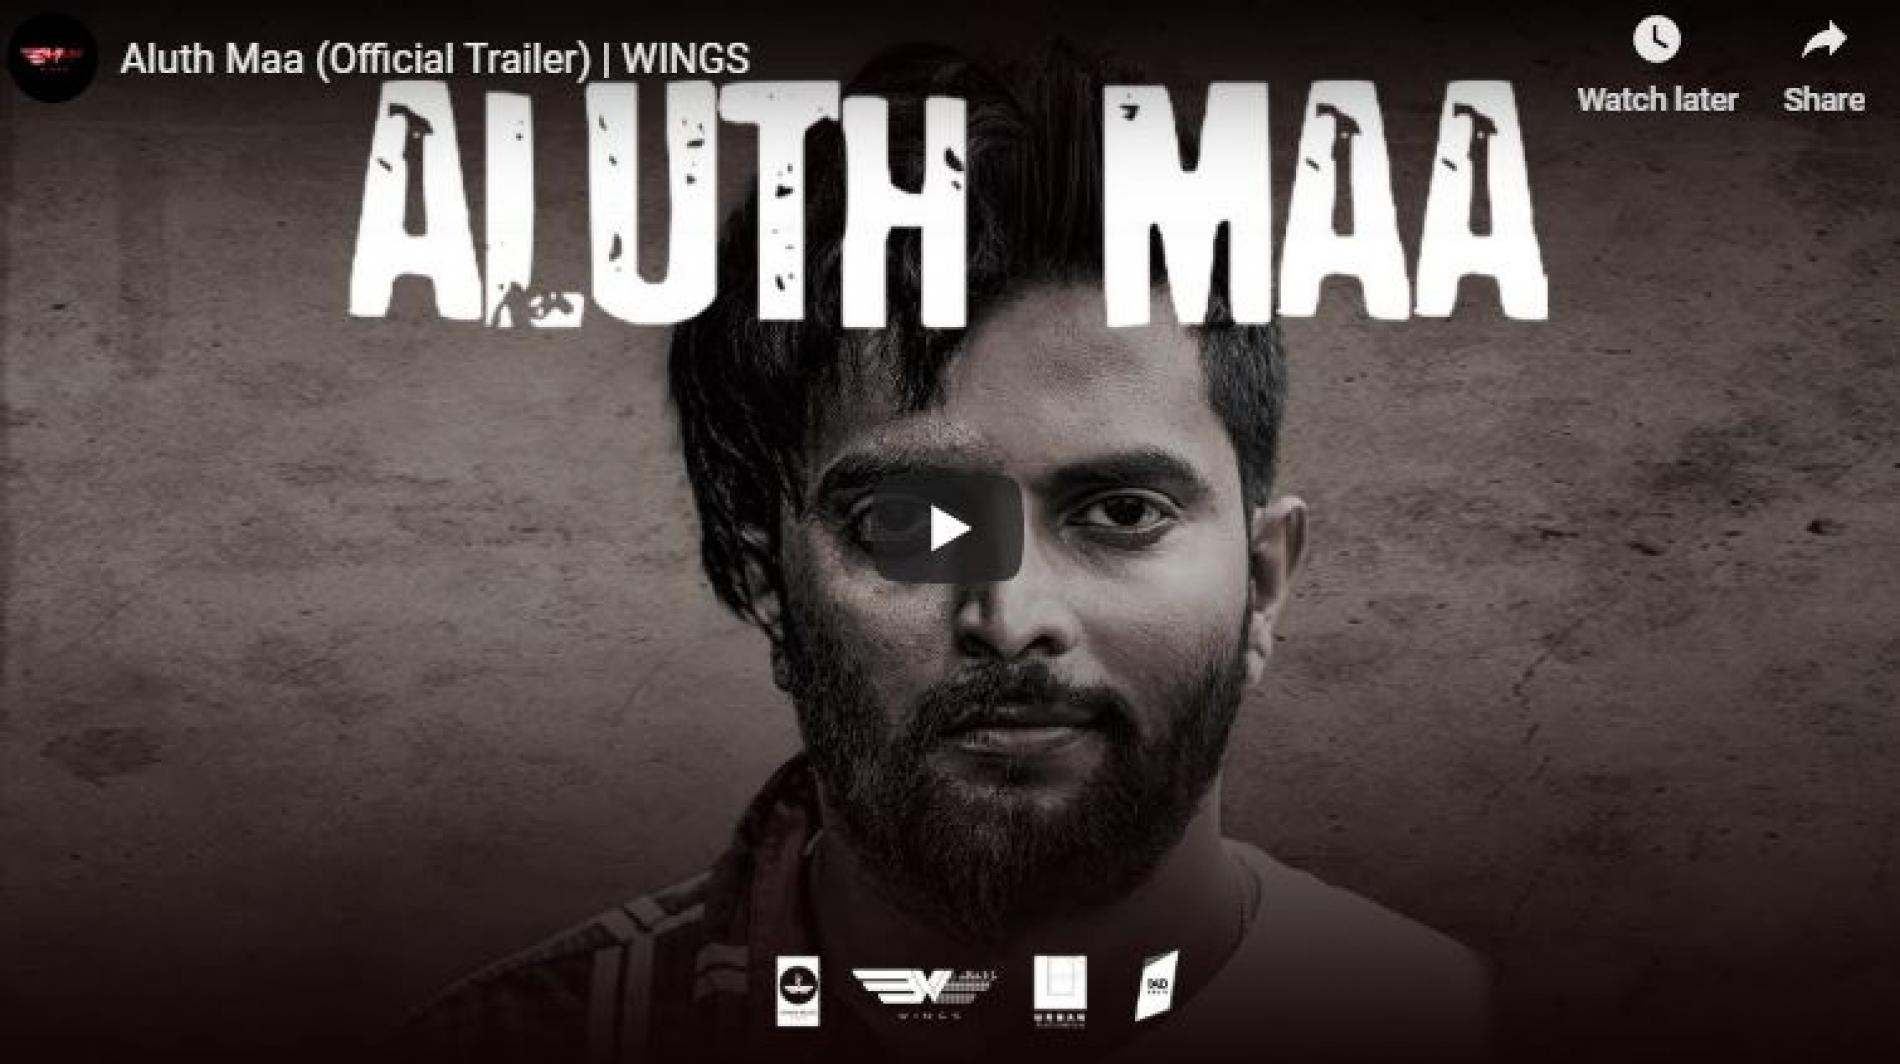 Aluth Maa (Official Trailer) | WINGS